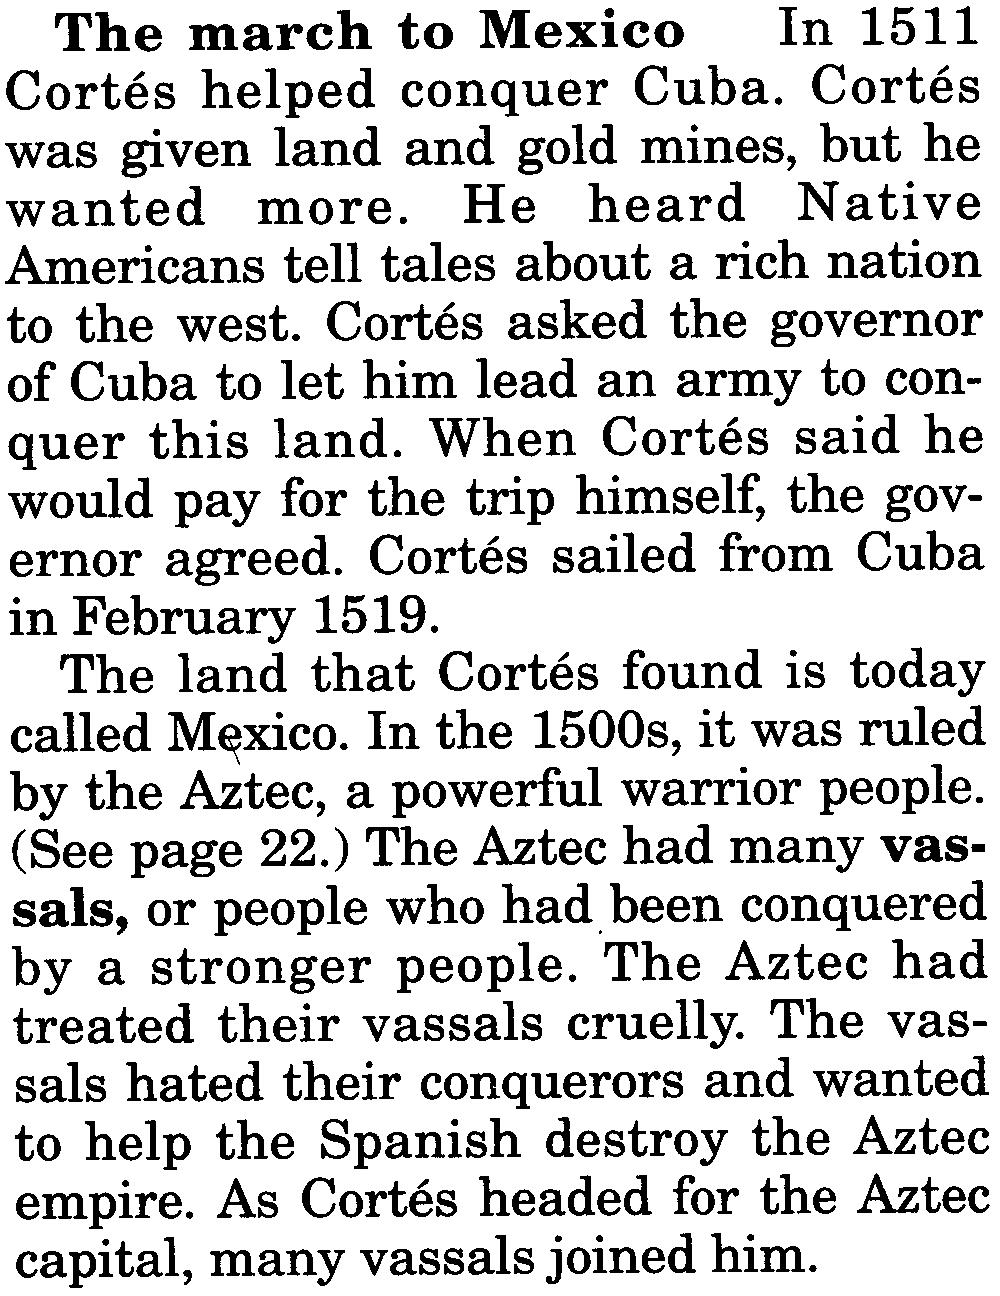 He heard Native Americans tell tales about a rich nation to the west. Cortes asked the governor of Cuba to let him lead an army to conquer this land.